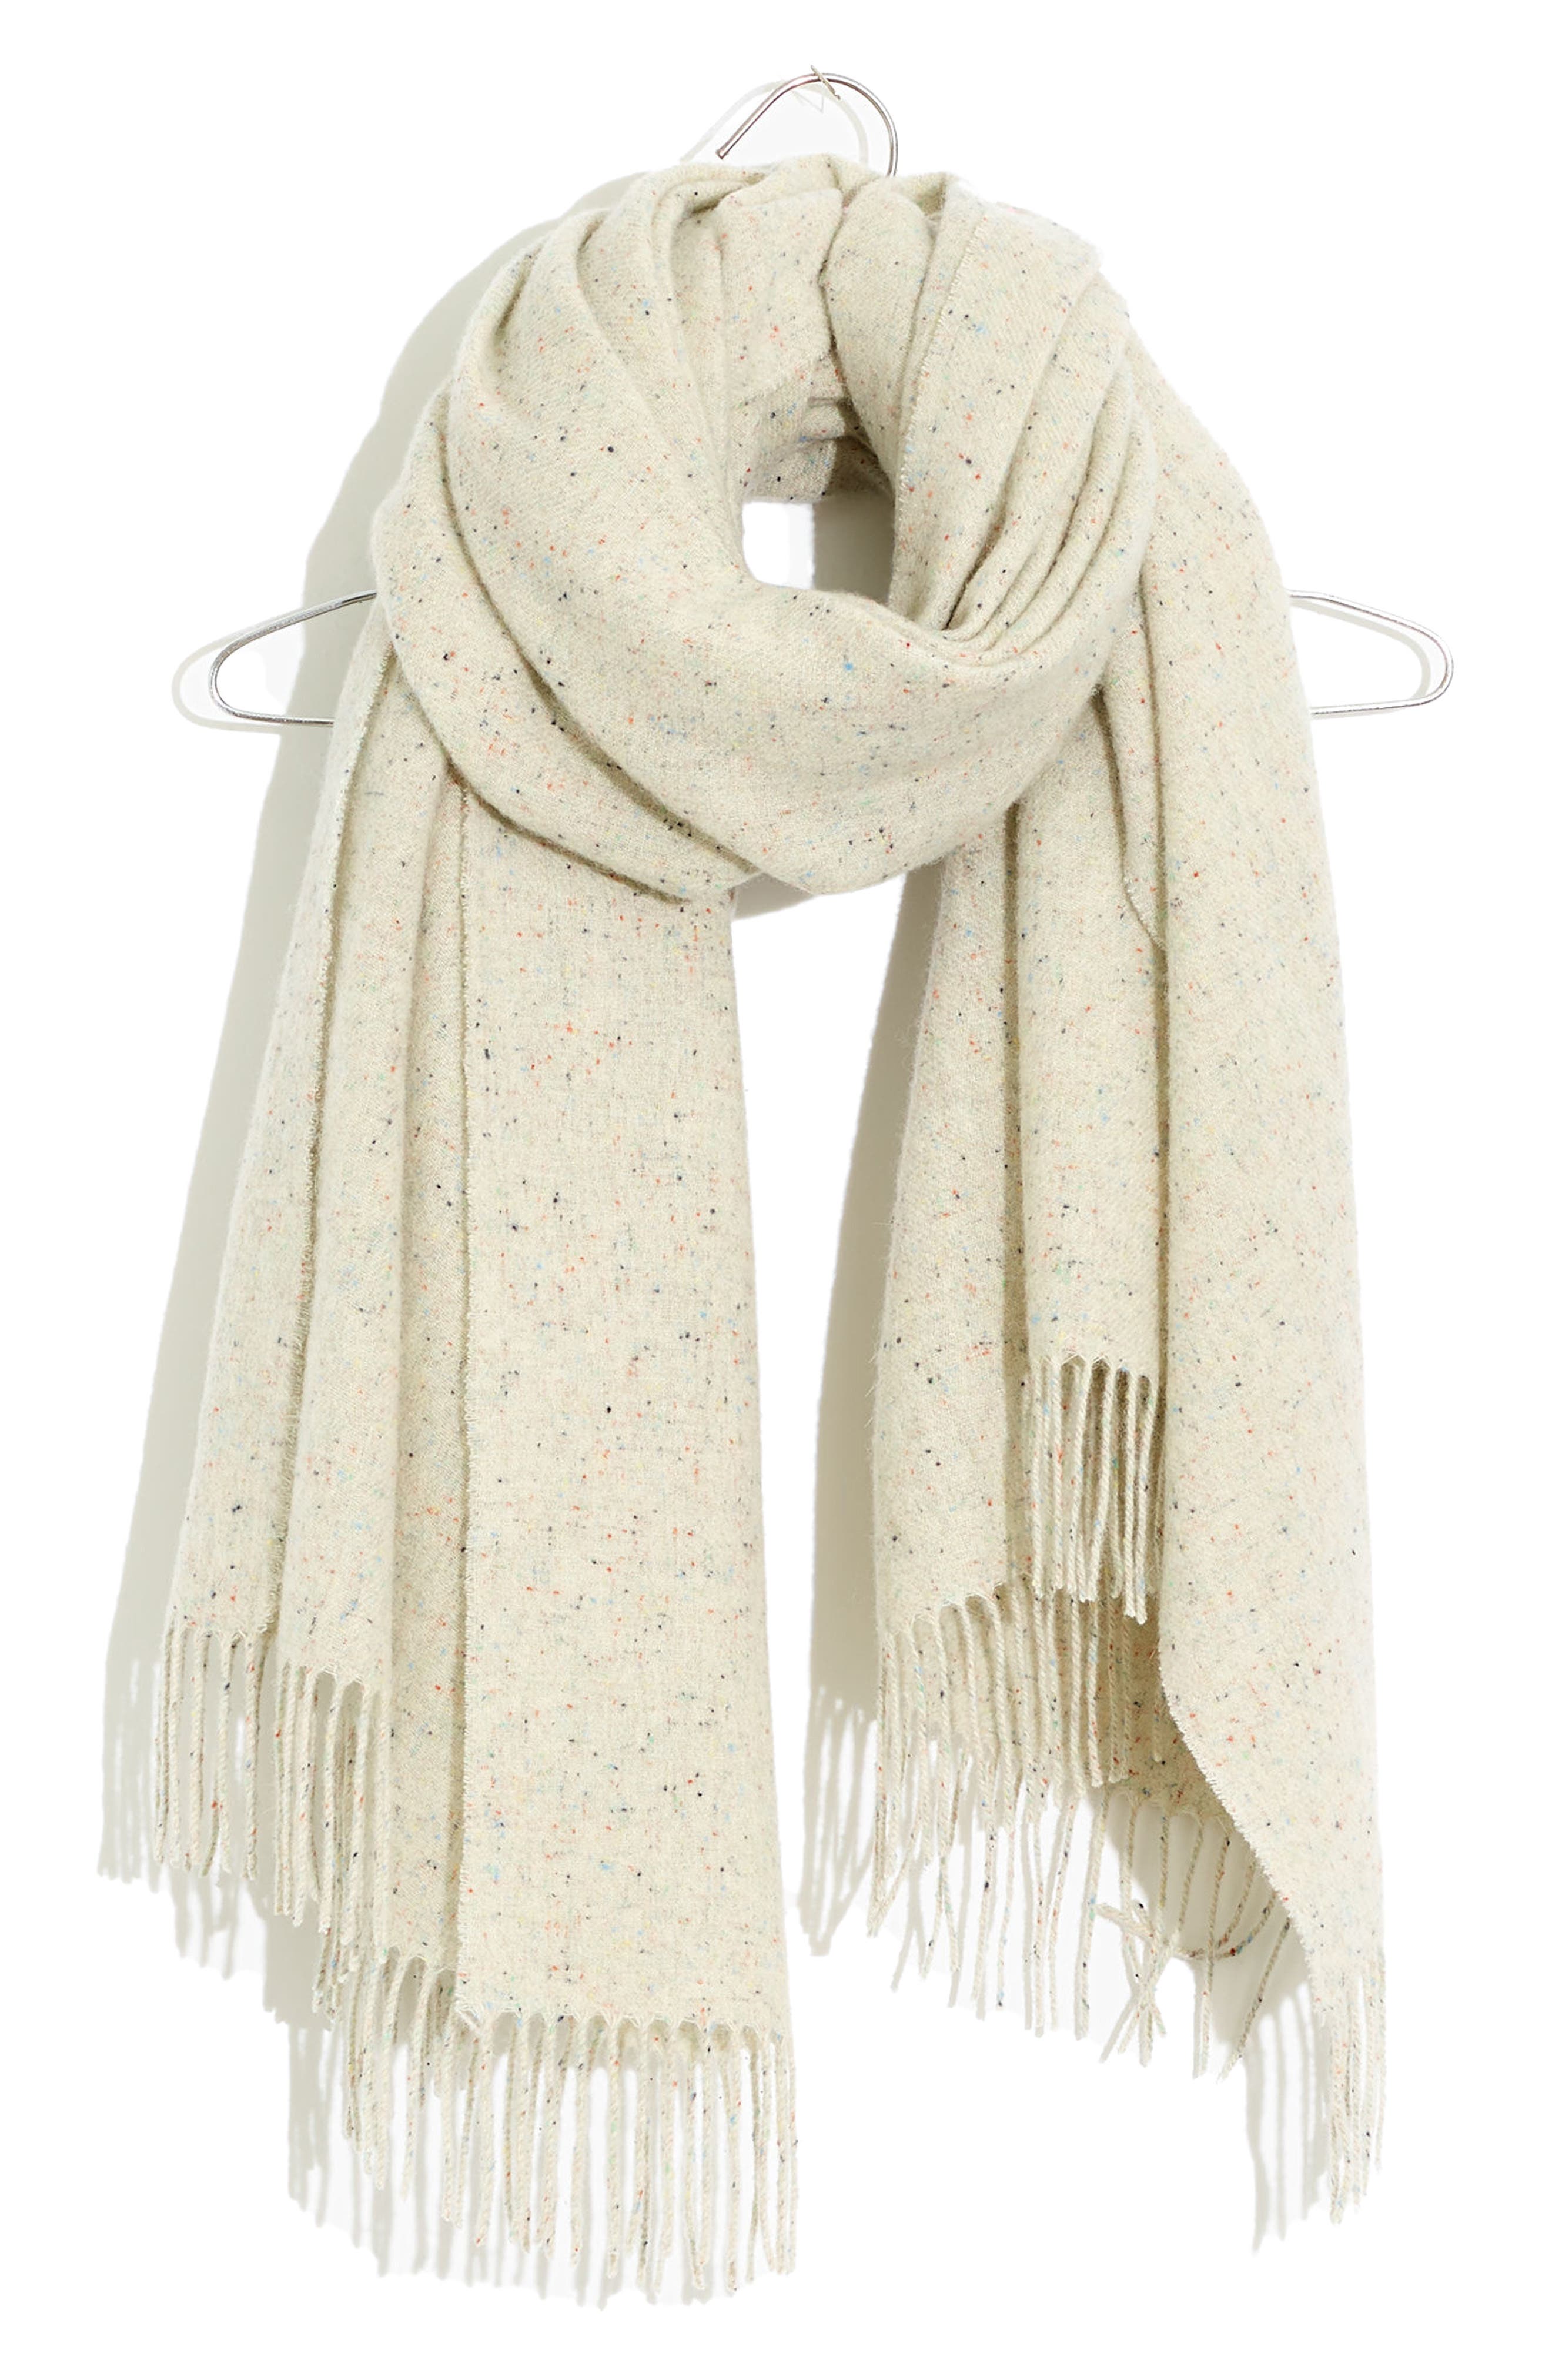 Accessories Scarves & Wraps Shawls & Wraps Strathurie 100% Lambswool Large Two Tone Cream Scarf 